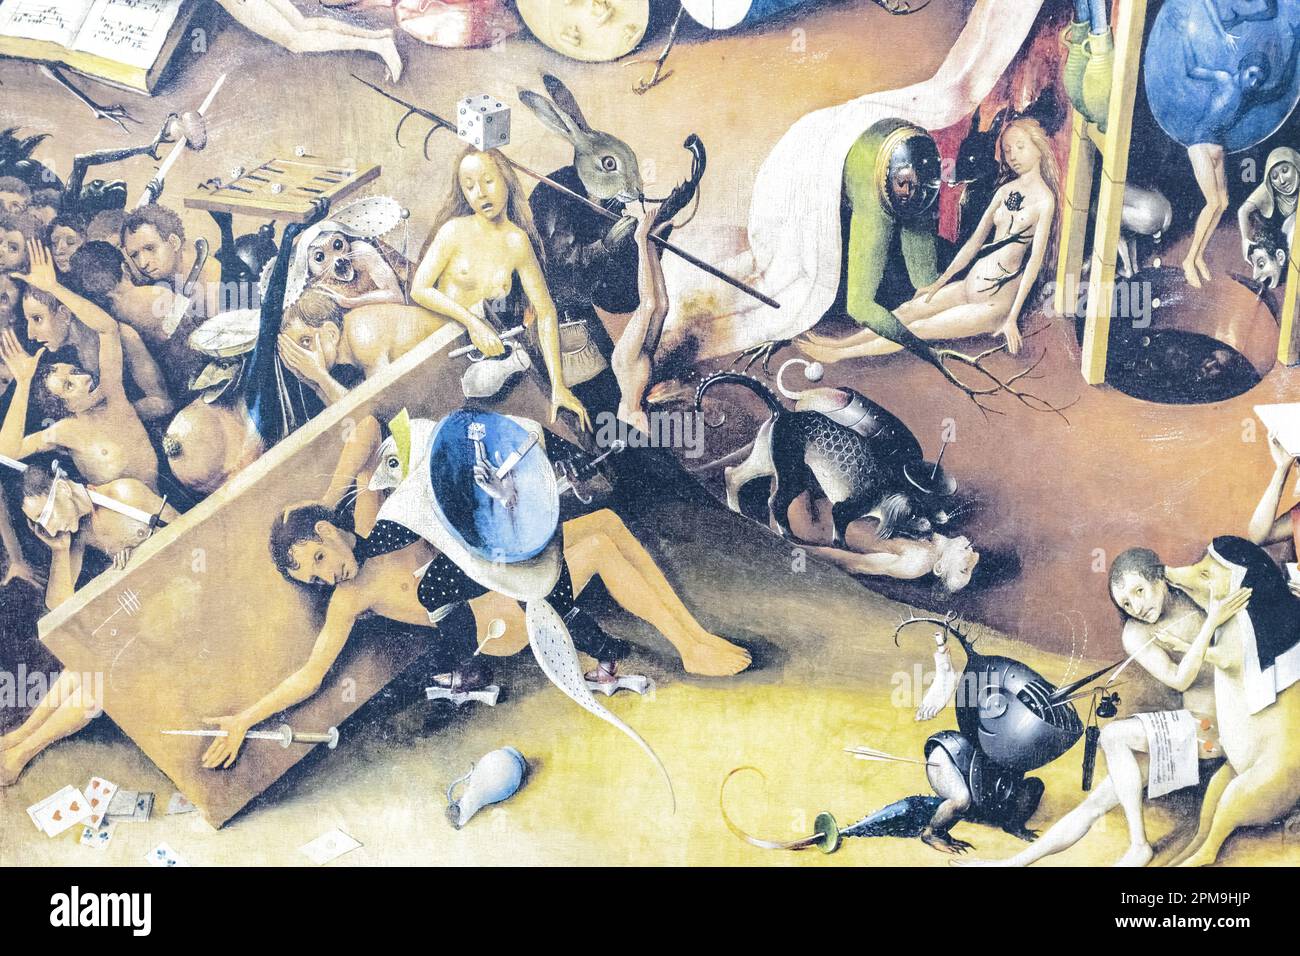 The Garden of Earthly Delights by Hieronymus Bosch,15th century Dutch painter. Right parts - Hell depicts monsters and sinners., fragment Stock Photo